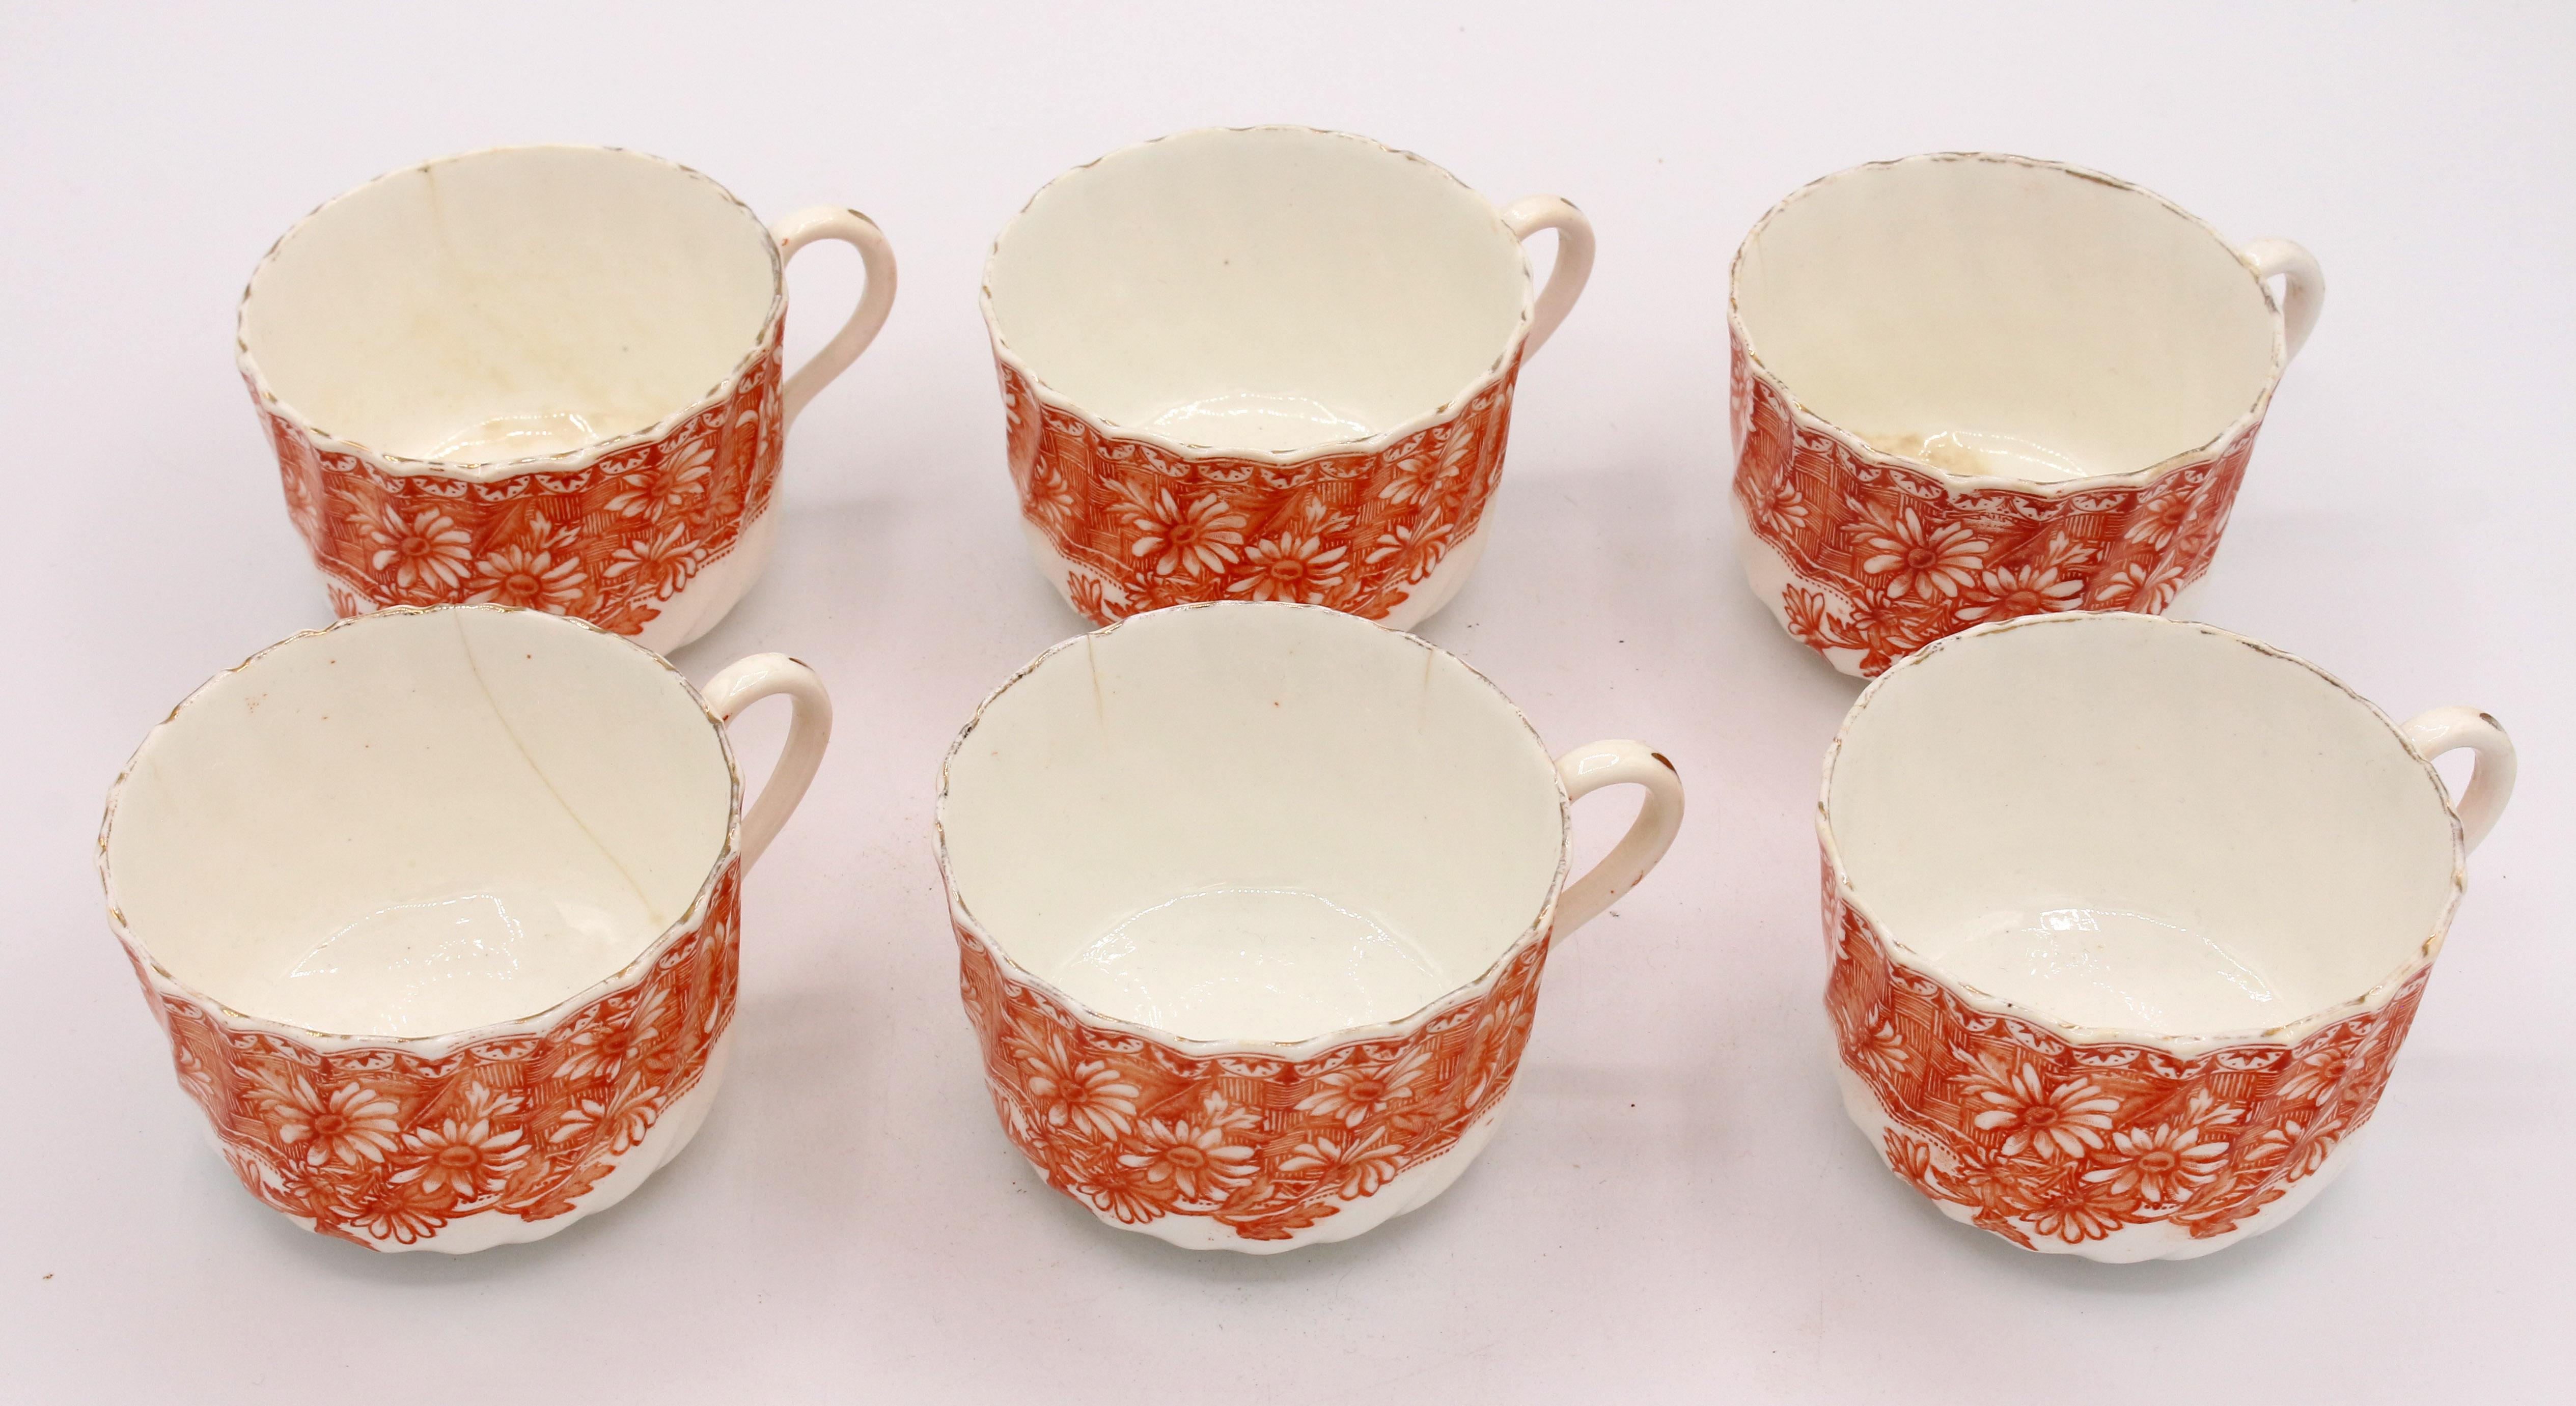 An English china orange decor tea & cake service for 6, circa 1880-1900, transfer printed in a Japonisme motif. 6 cups & saucers, 6 cake plates & a pair of serving plates. Tea stains & kiln flaws.
8 3/8